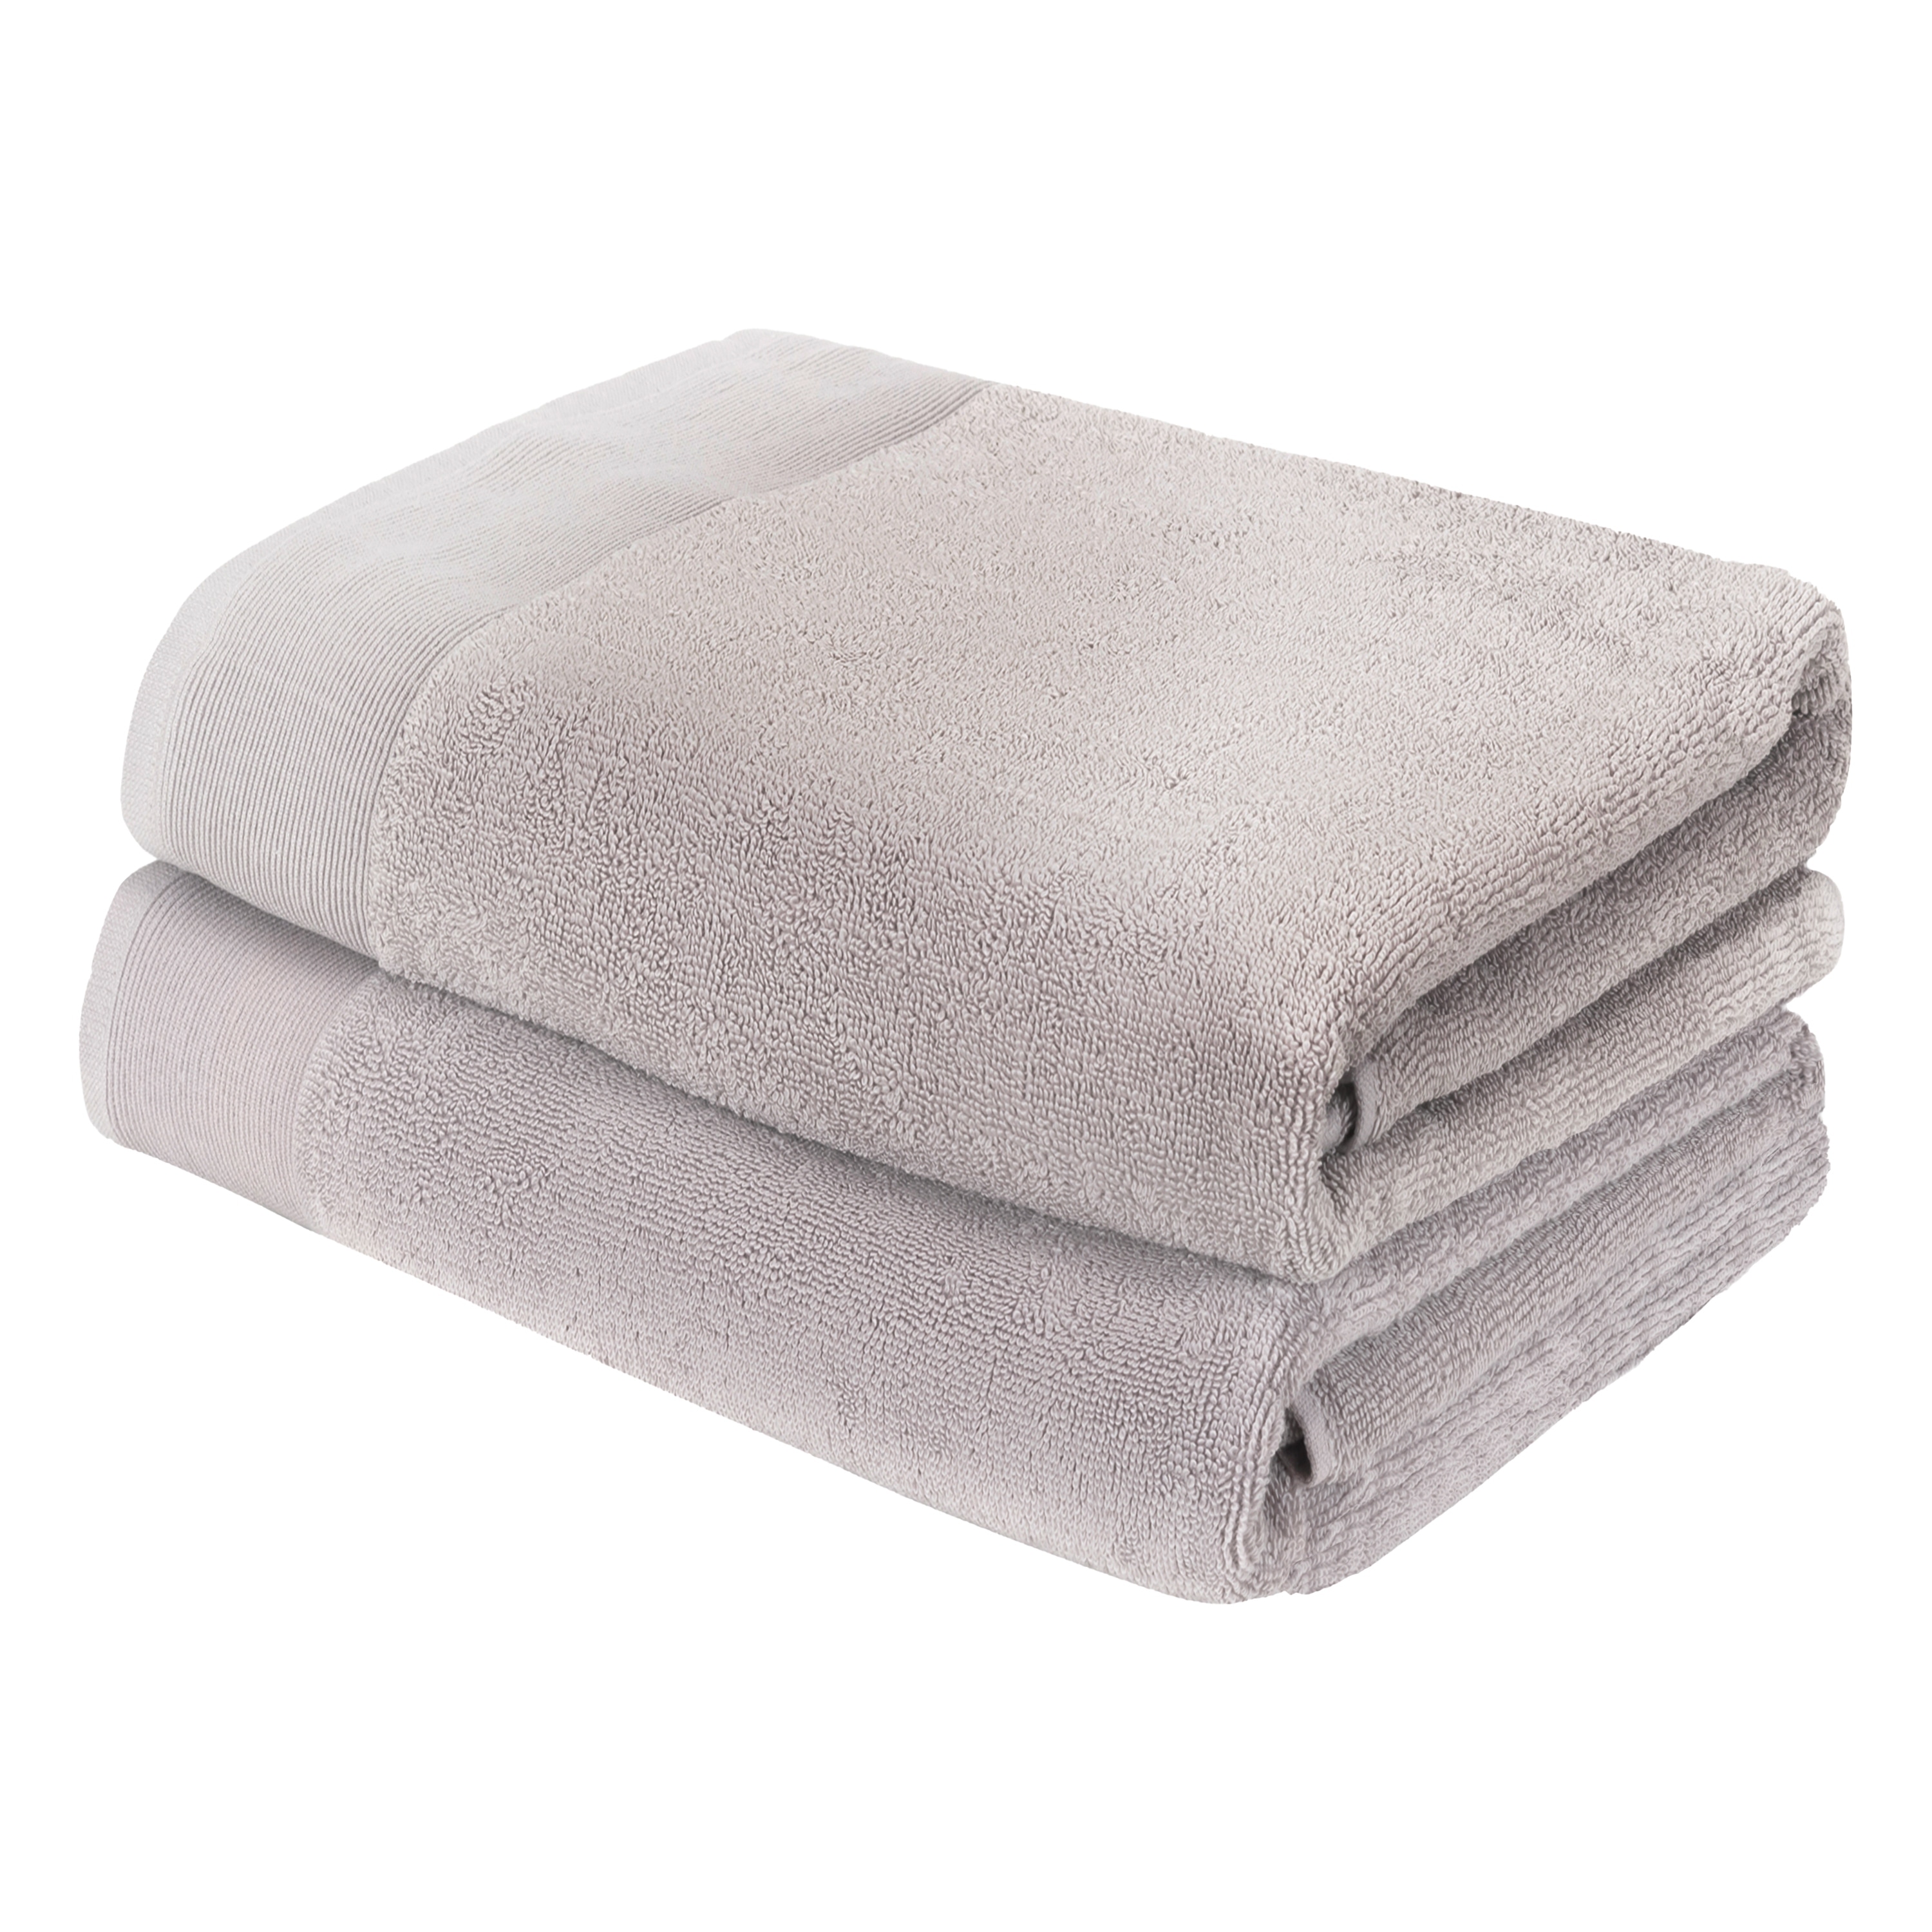 https://ak1.ostkcdn.com/images/products/is/images/direct/230a299e8661ea0afcc766227b899359daab9f33/Fabstyles-Camelot-Bath-Towel-600-GSM-Zero-Twist-Cotton-Set-of-2.jpg